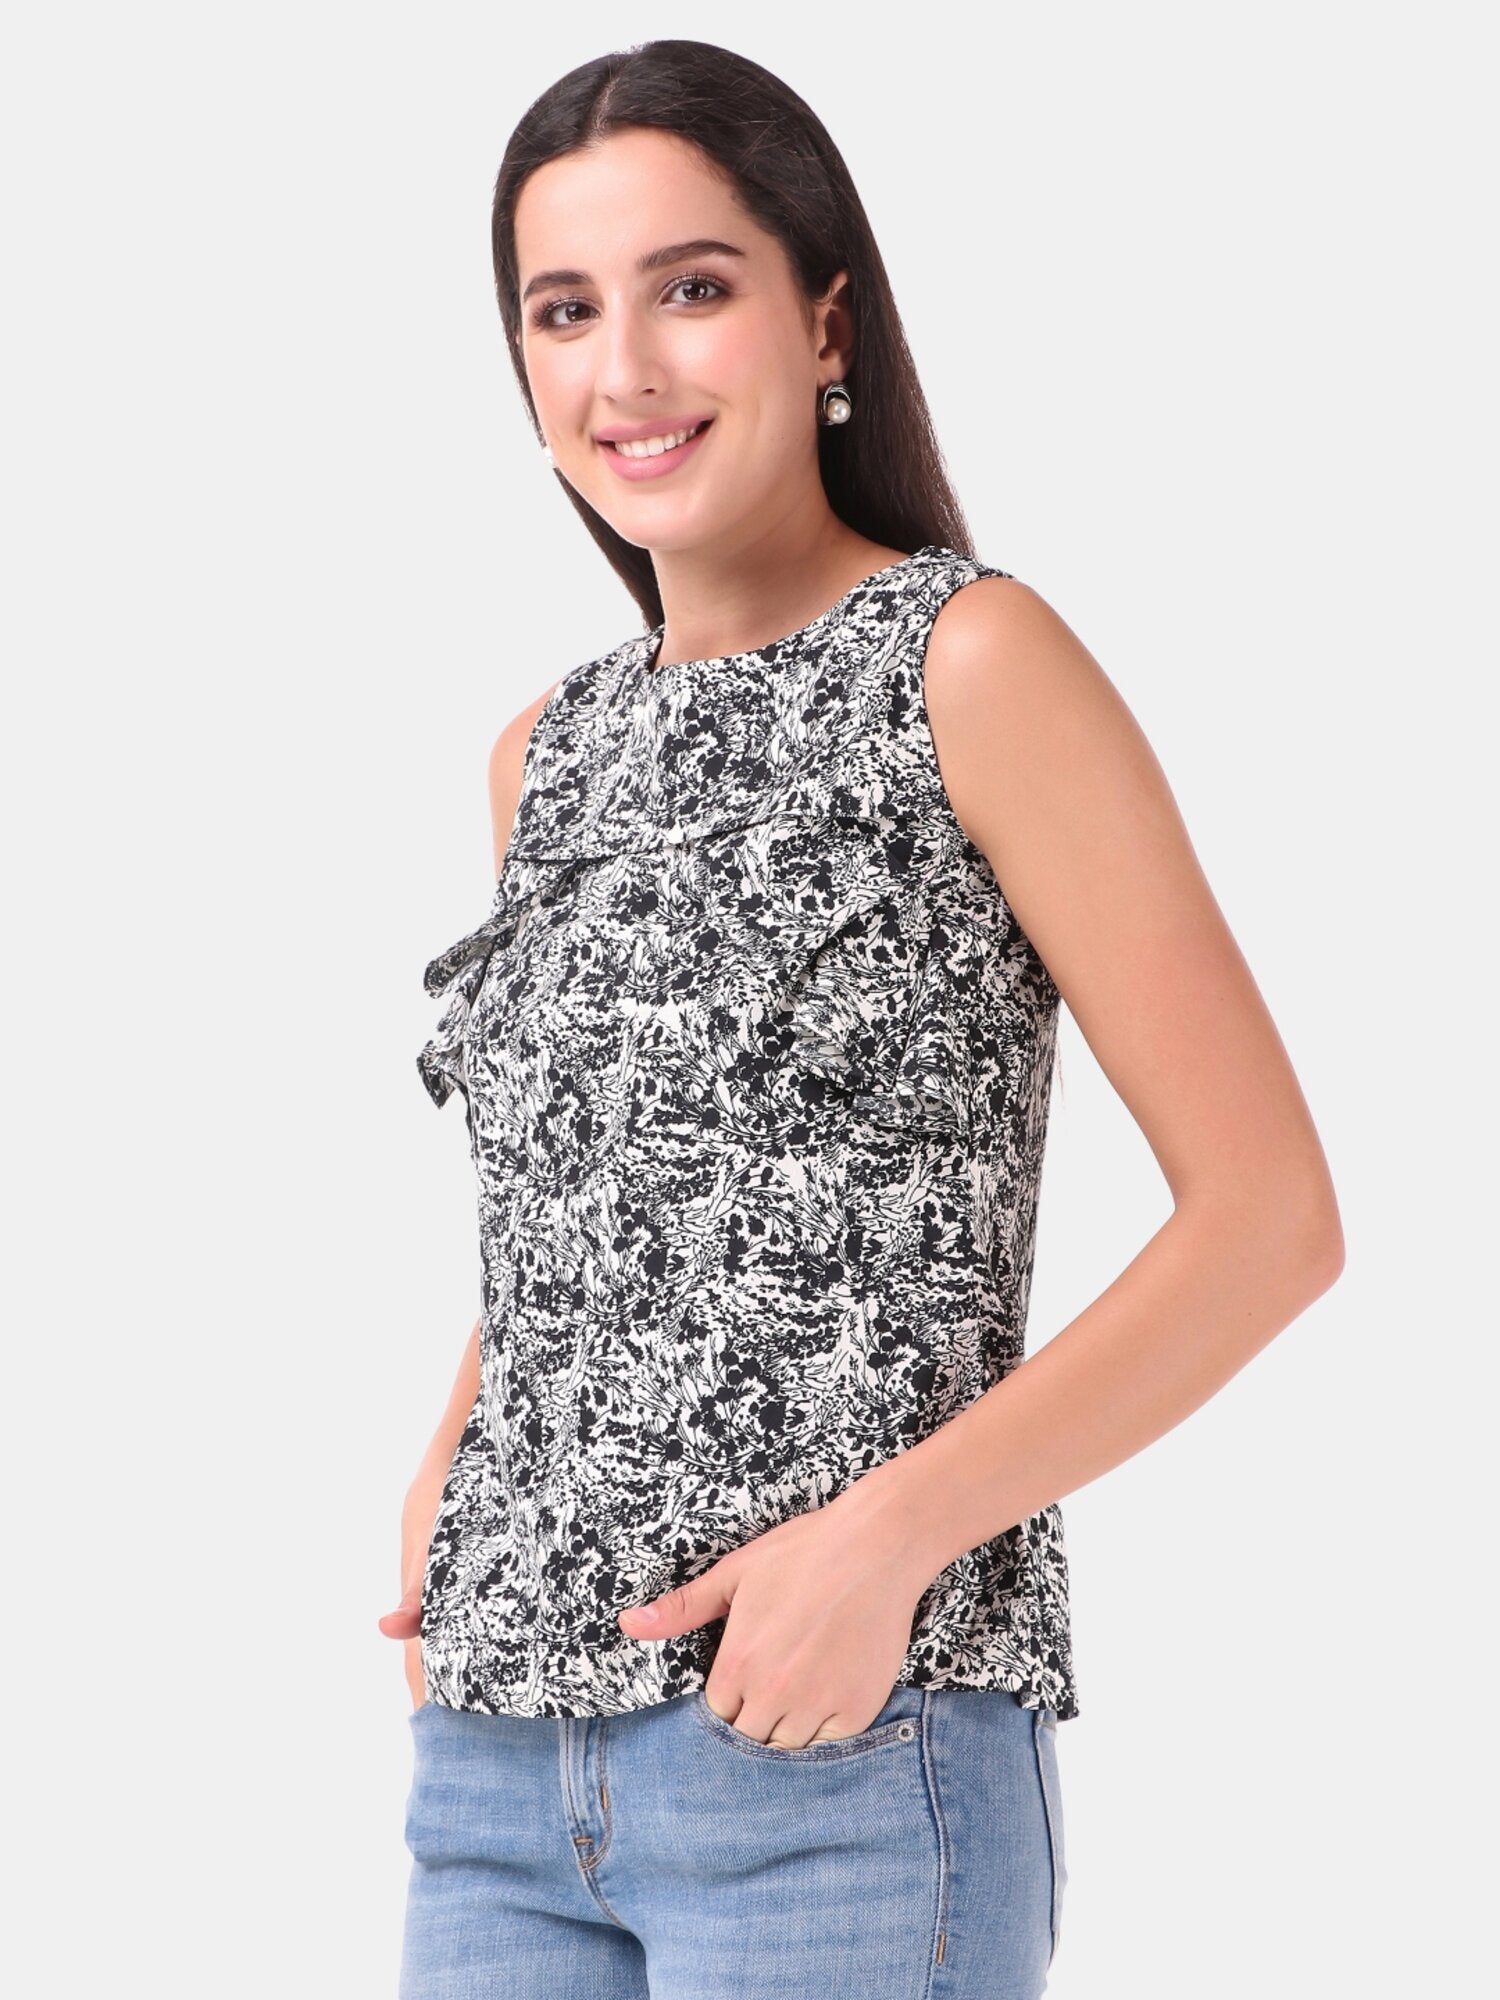 Women's Black Abstract Printed Summer Only Top - MESMORA FASHION